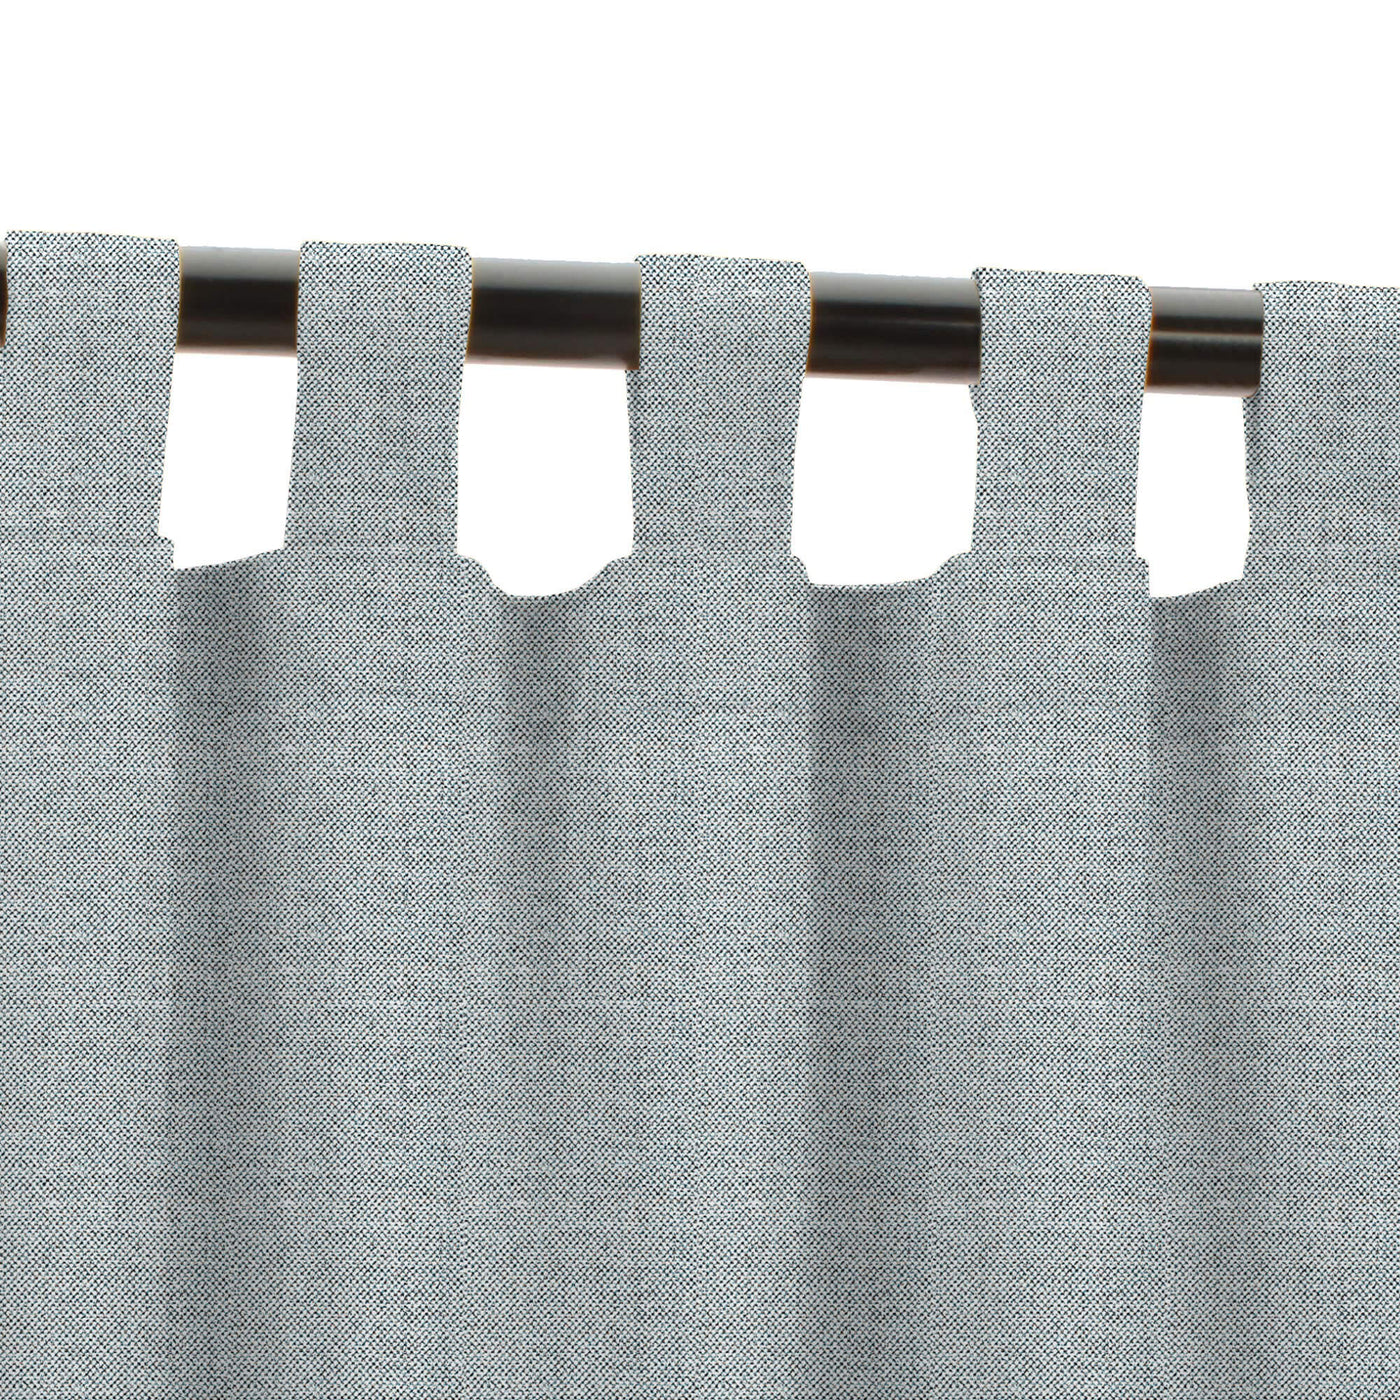 PENGI Outdoor Curtains Waterproof - Sailcloth Steeple Gray